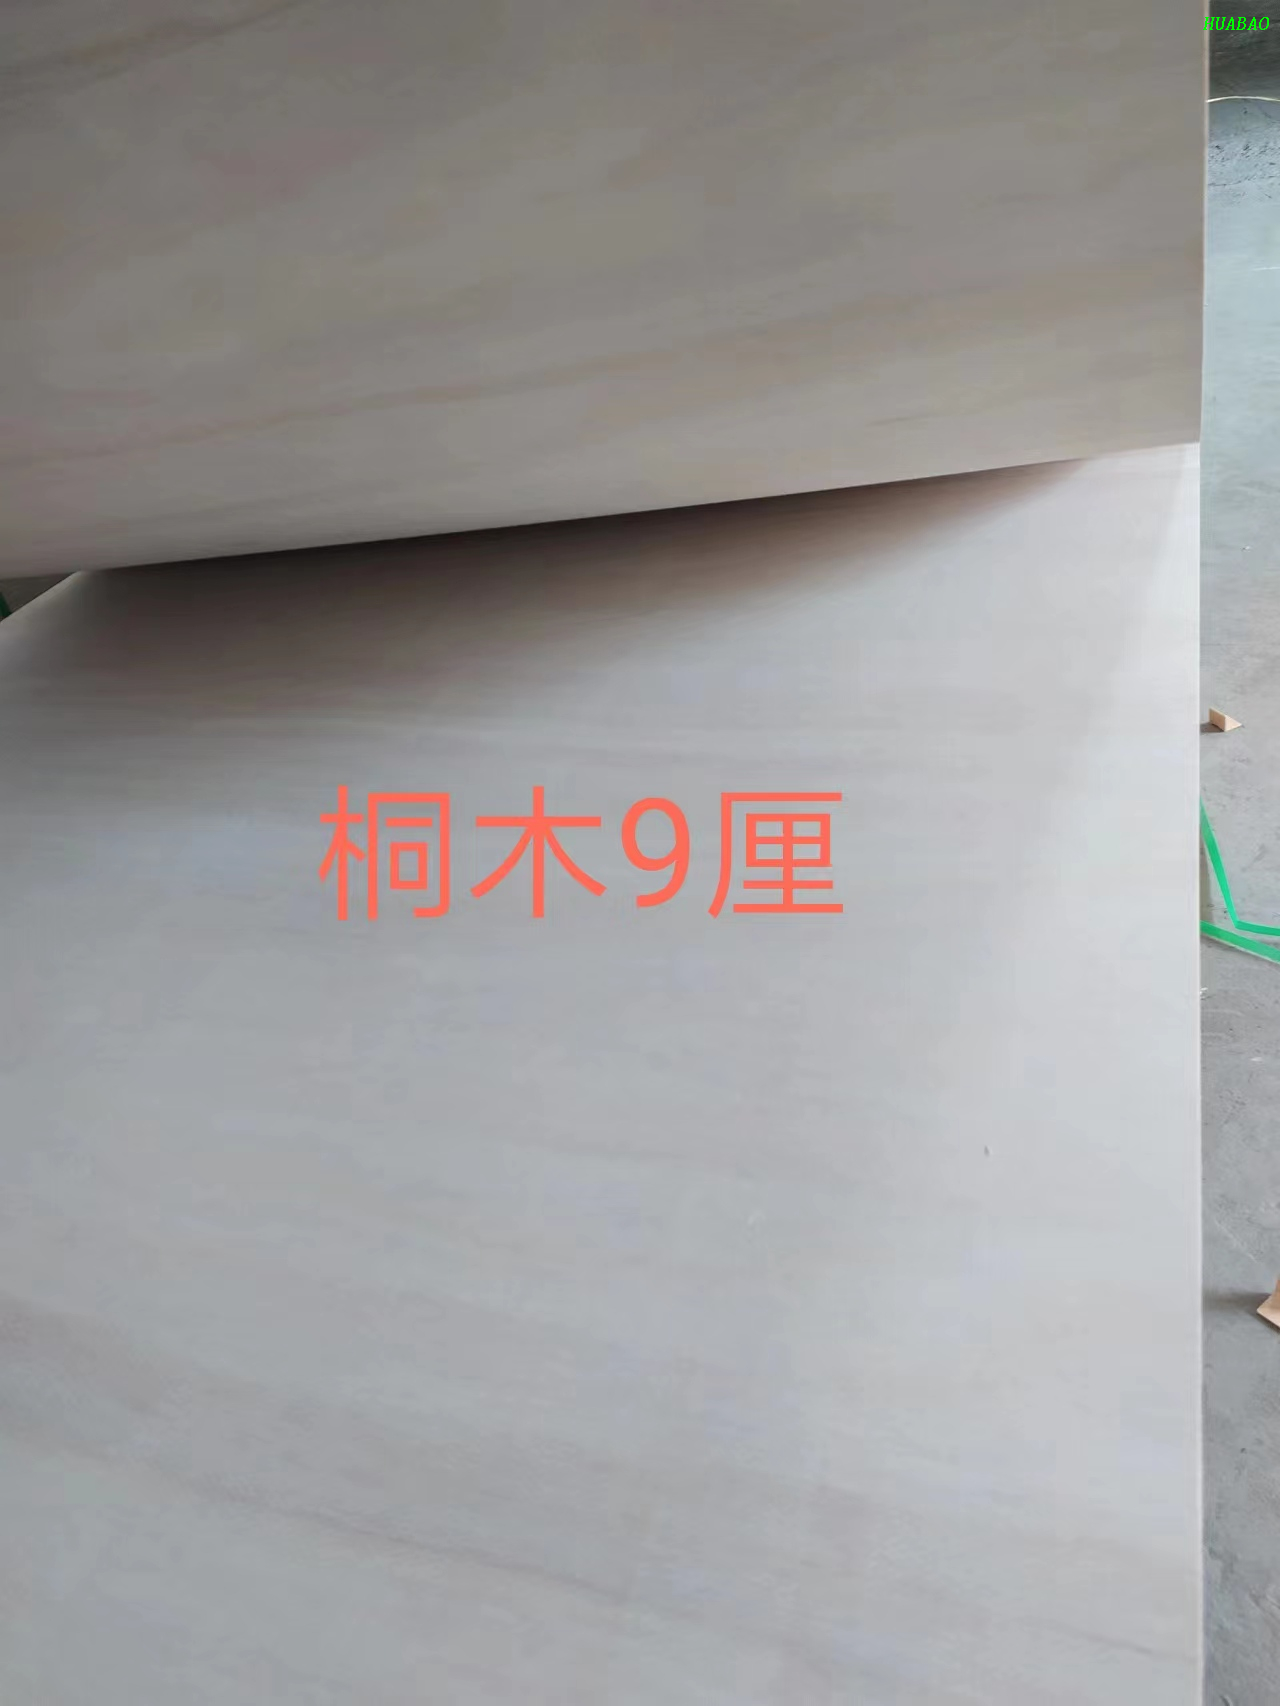 Flexi Bendable Plywood For Furnitures